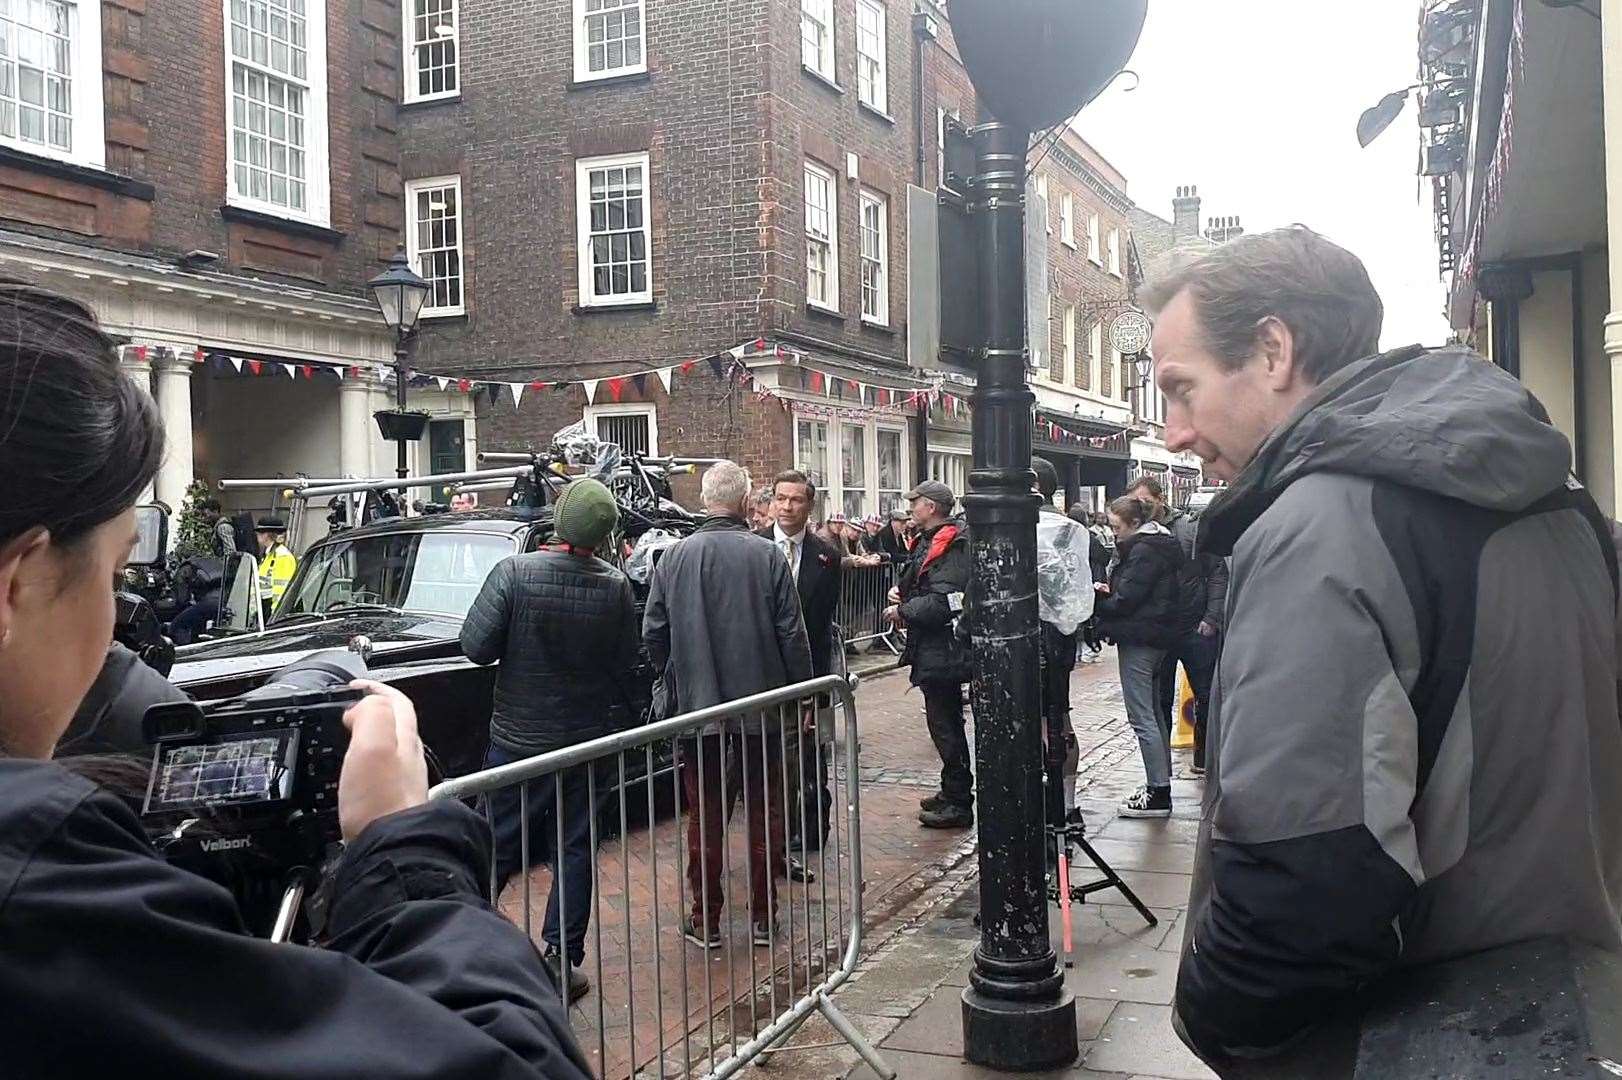 Dominic West who plays Prince Charles in The Crown spotted in Rochester High Street